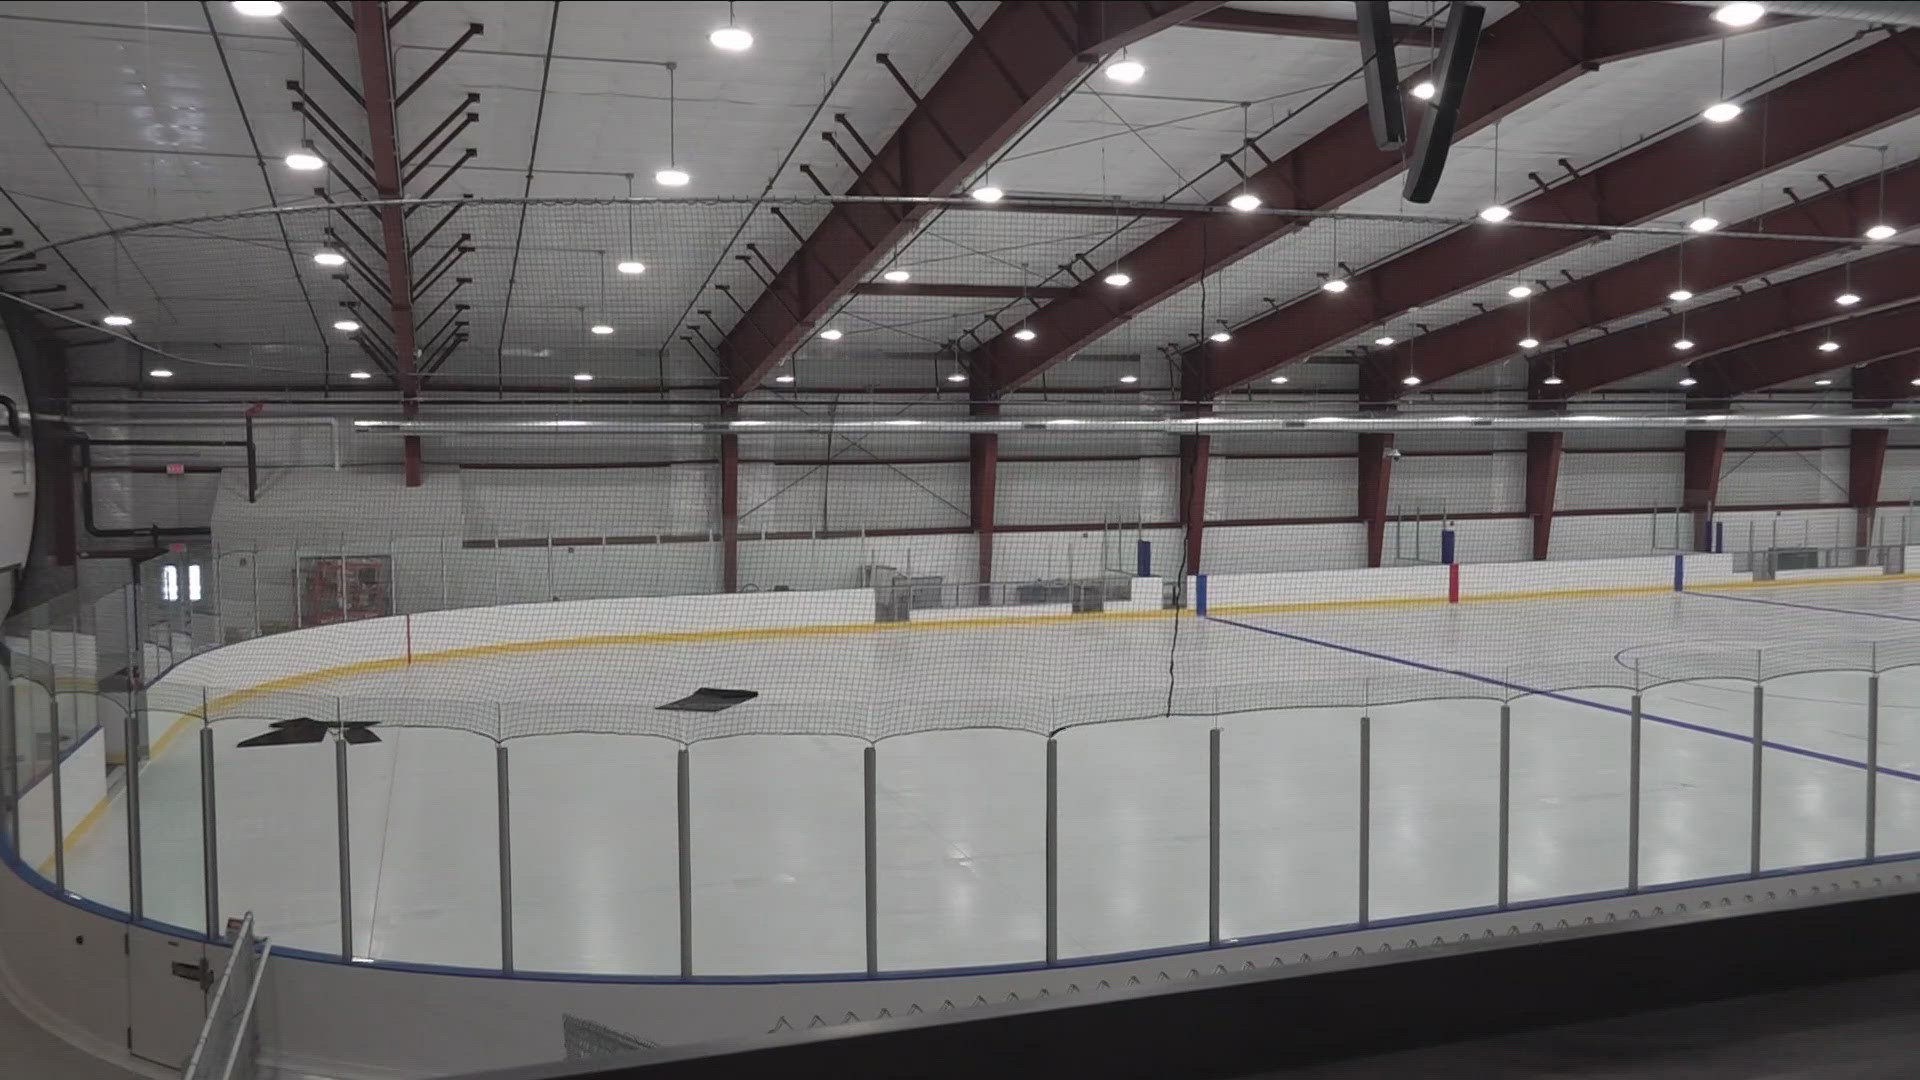 The arena is one of several additions coming to Paddock park in the Town of Tonawanda